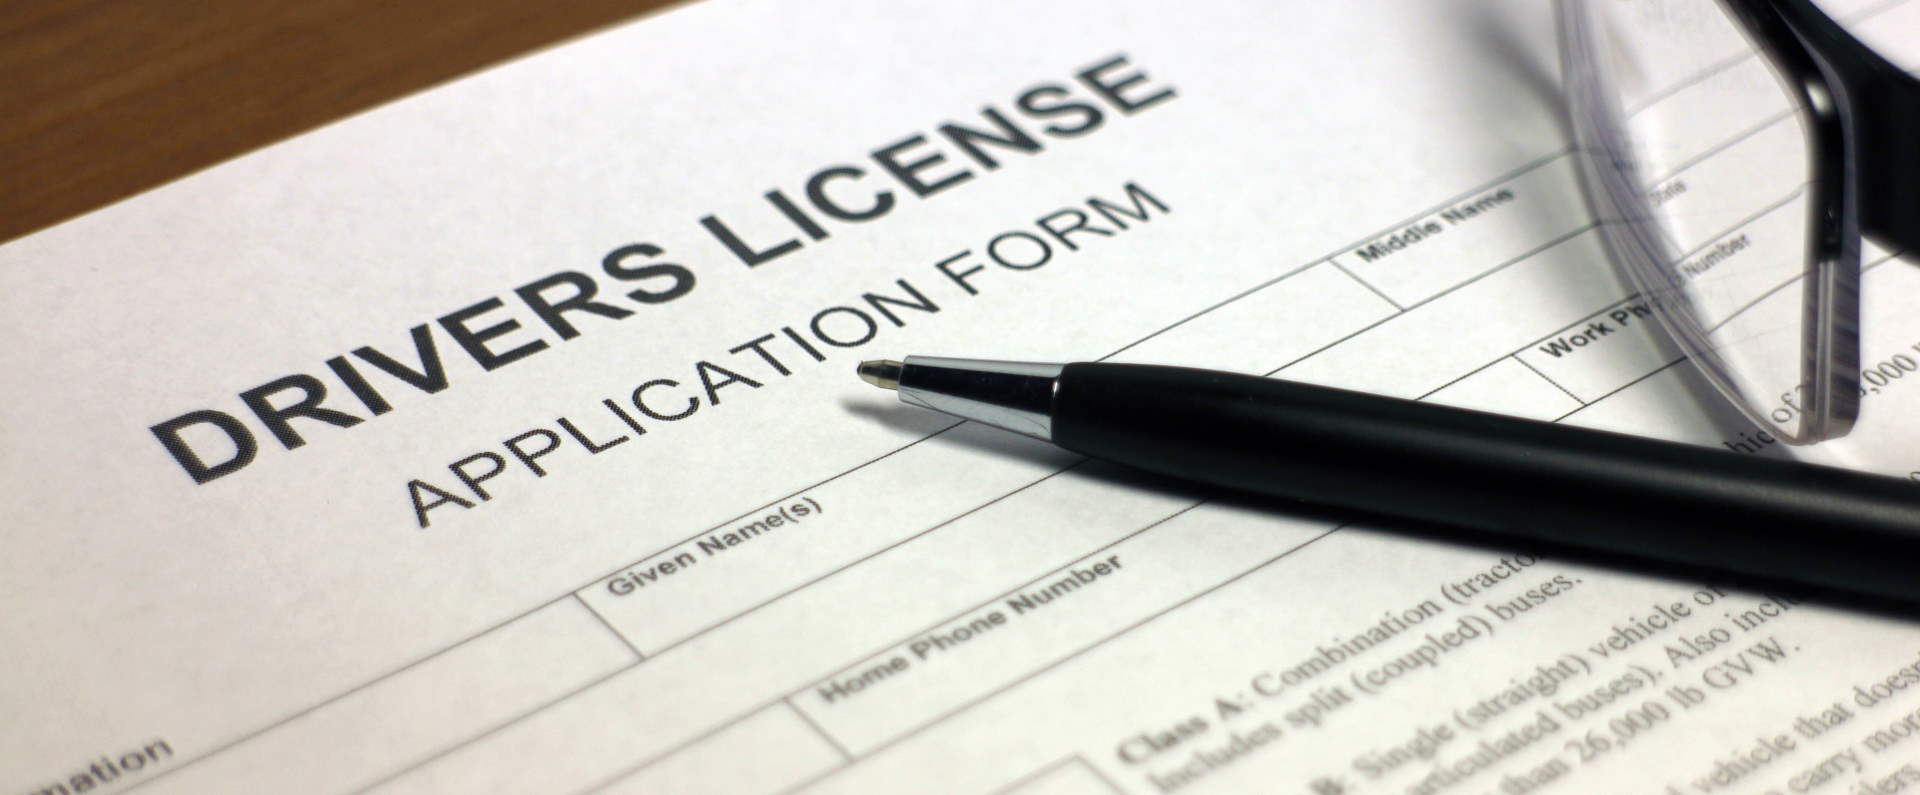 Pen laying across driver's license application form